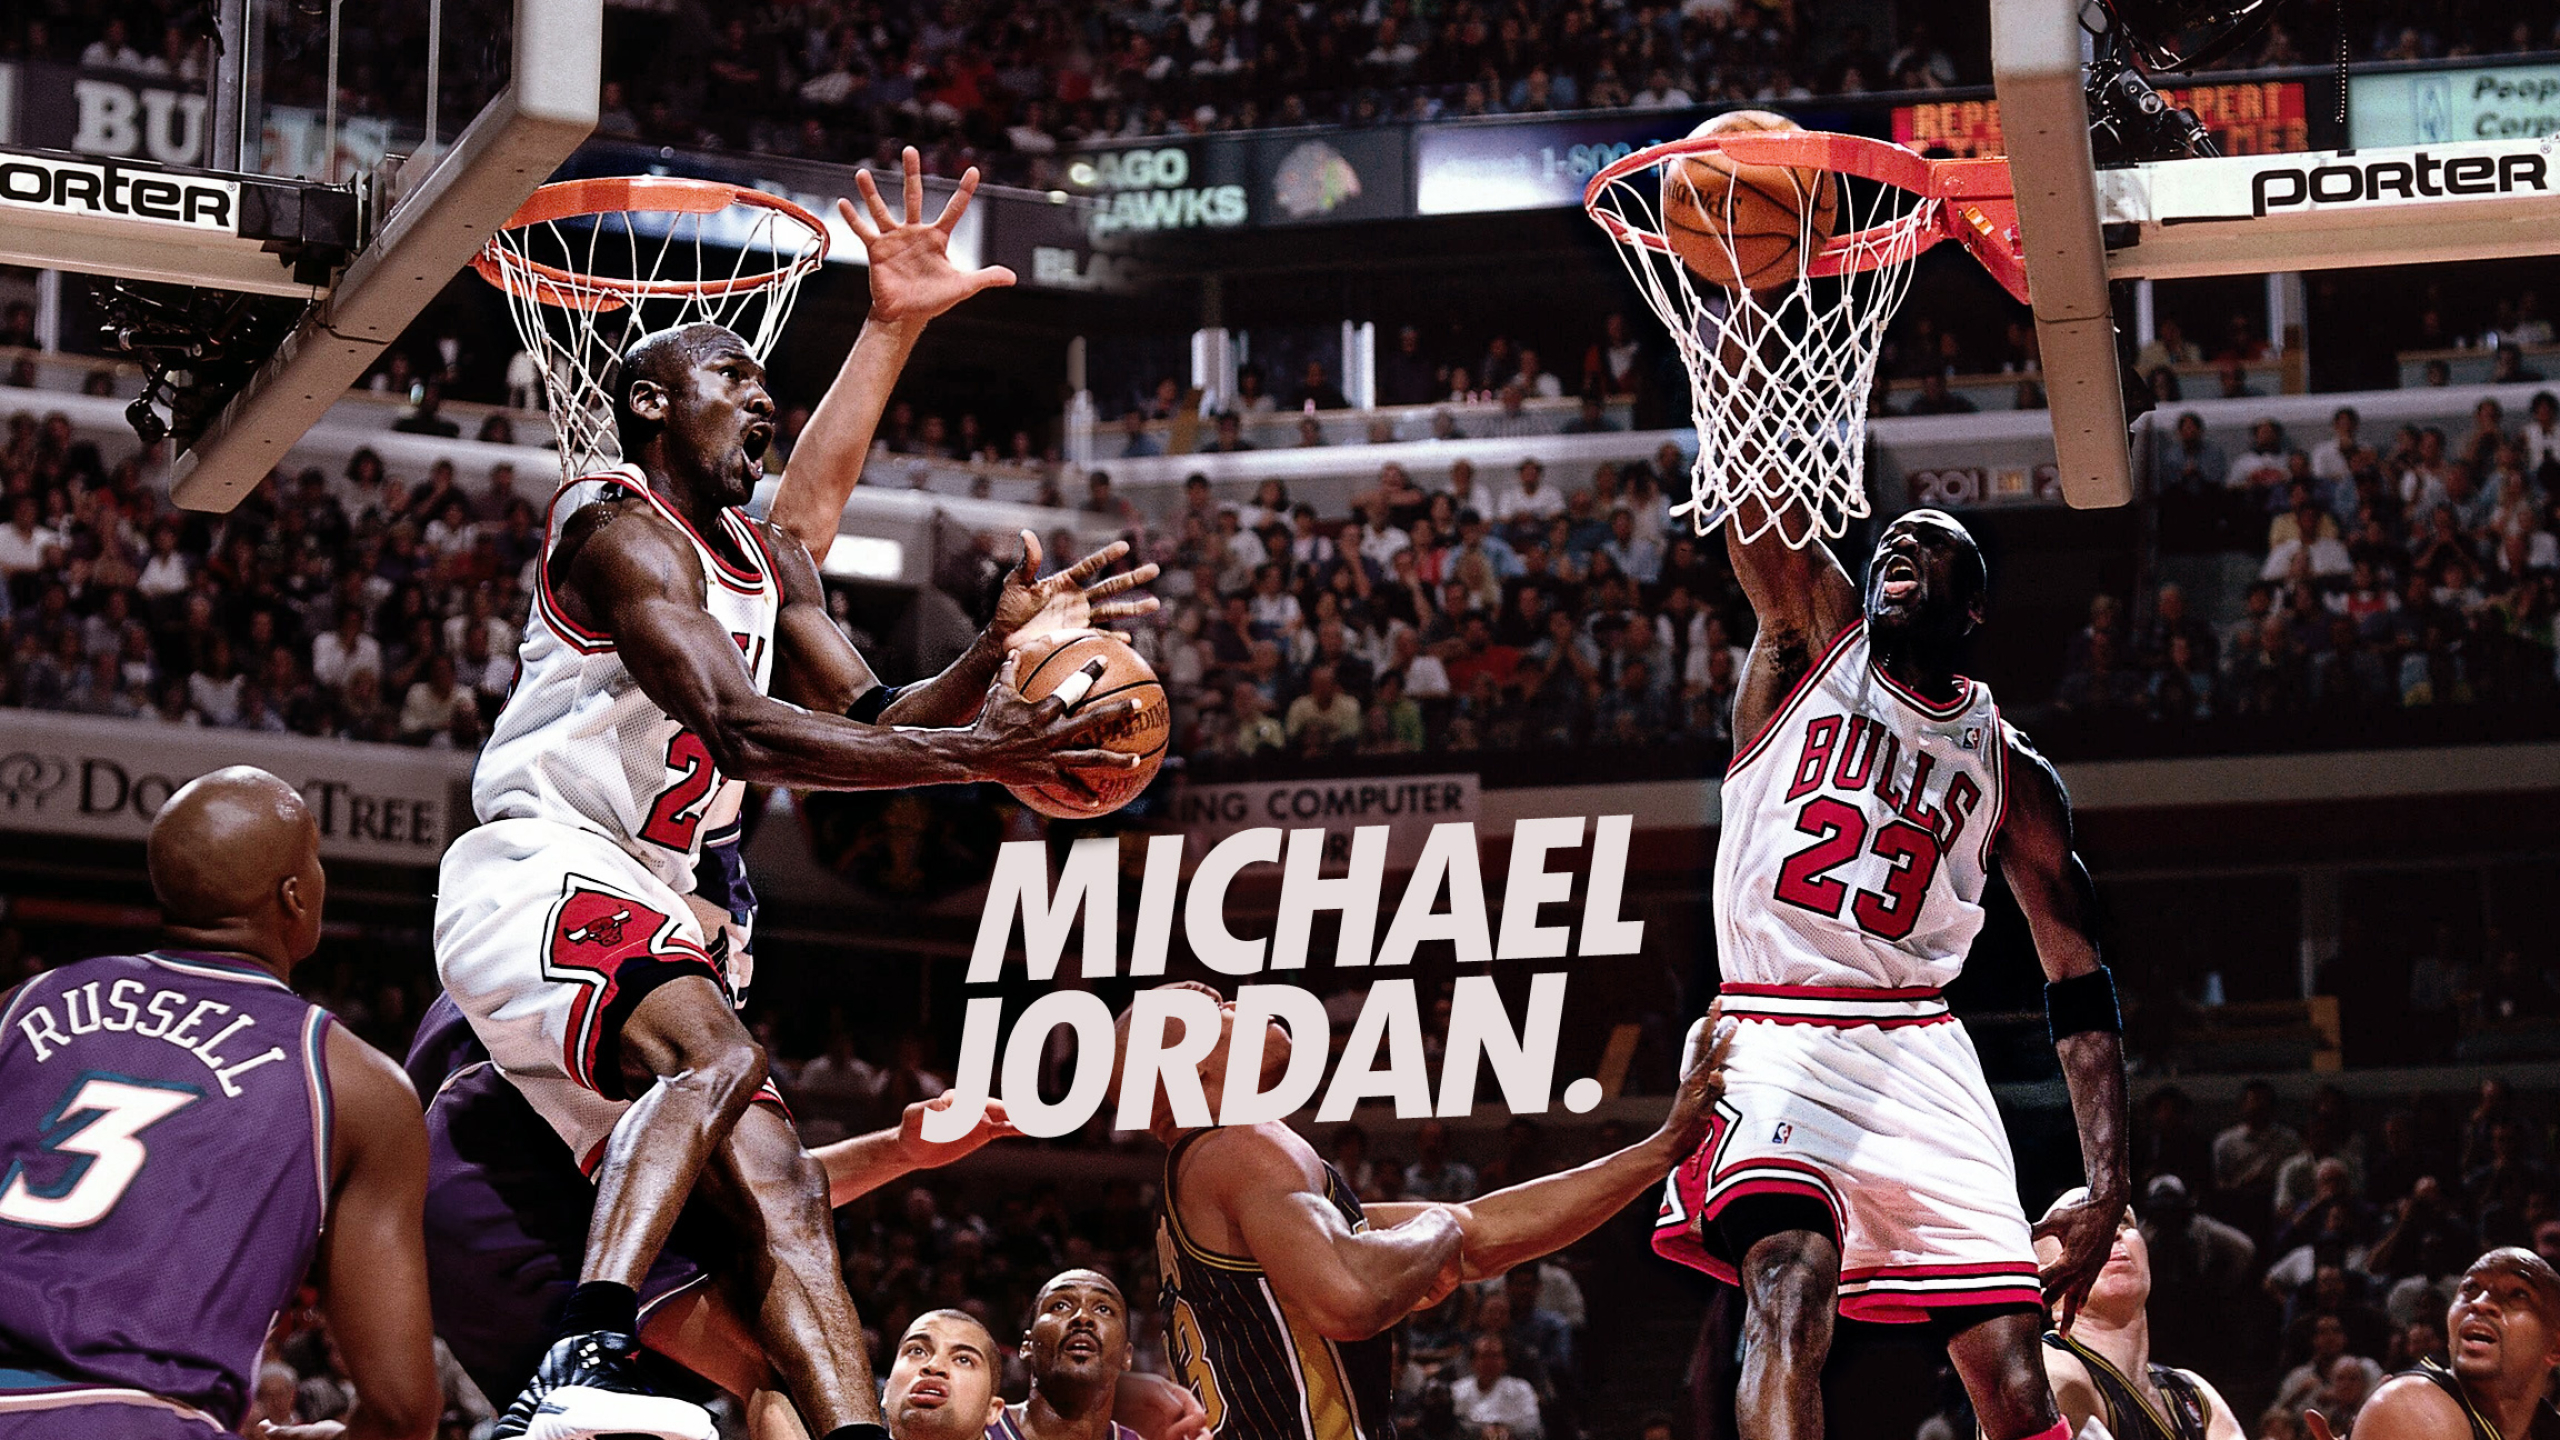 Chicago Bulls: Michael Jordan, The only NBA team to qualified for the playoffs in its inaugural season. 2560x1440 HD Background.